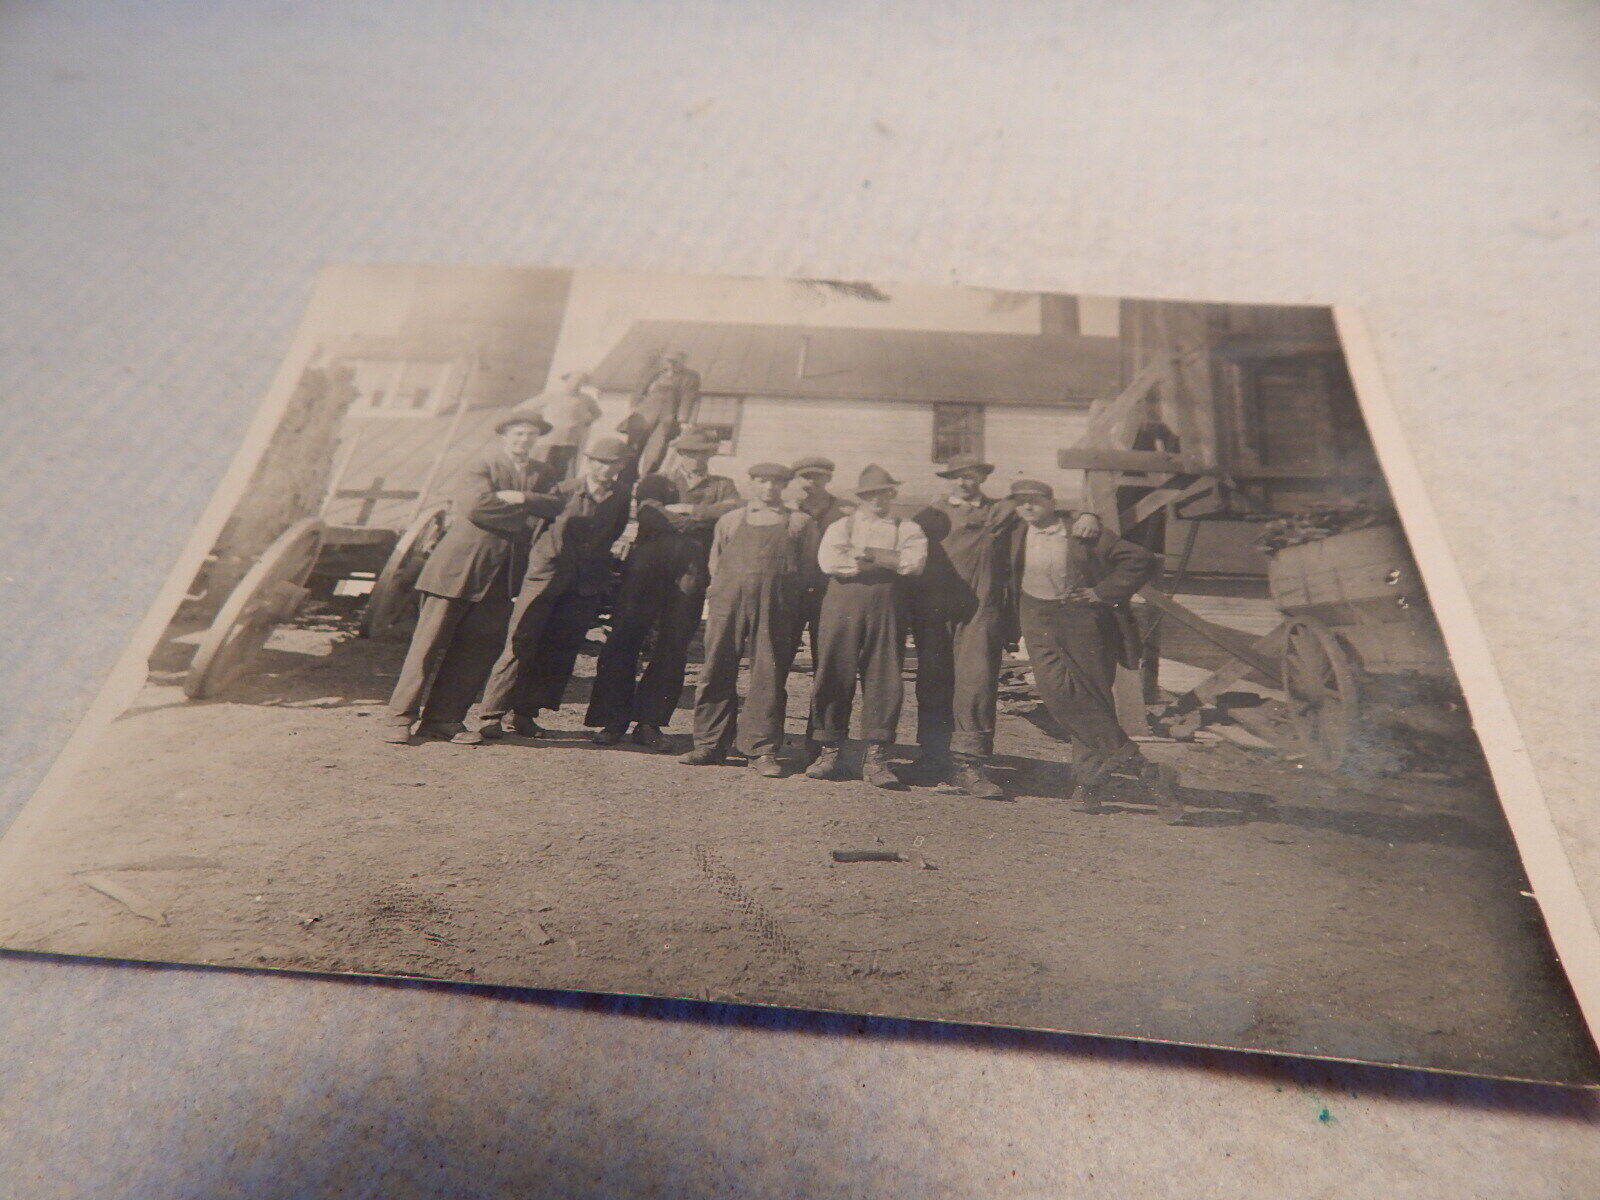 VTG EARLY 1900S RPPC REAL PHOTO  POSTCARD GROUP OF WORKERS WERE ?  FACTORY RR?